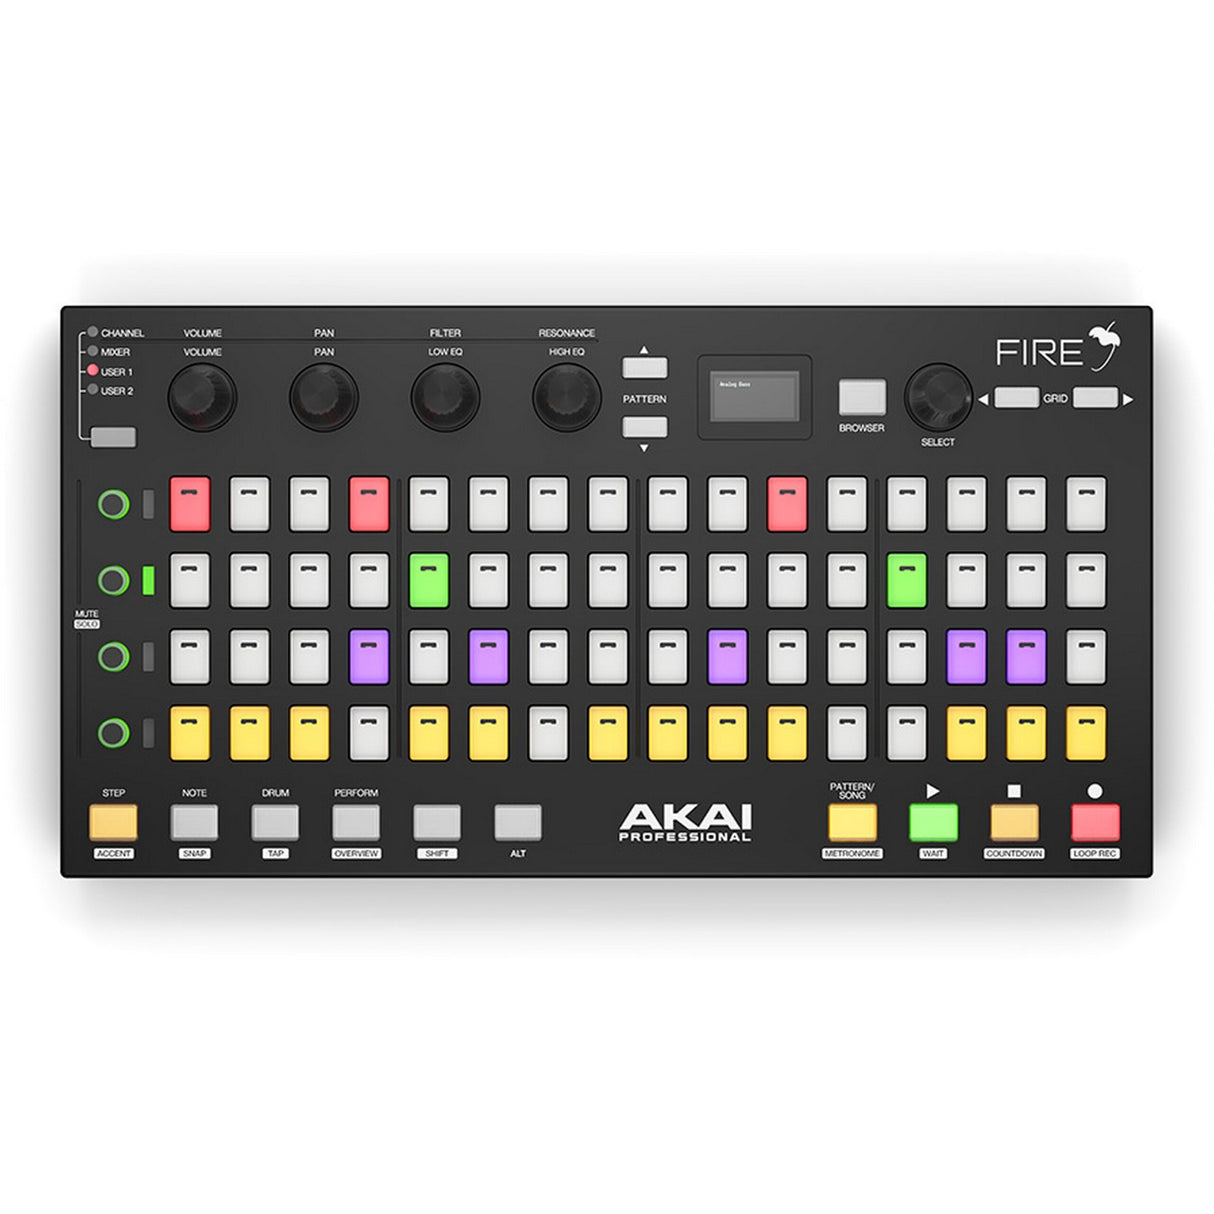 Akai Professional FIRE Hardware Controller for FL Studio without Software